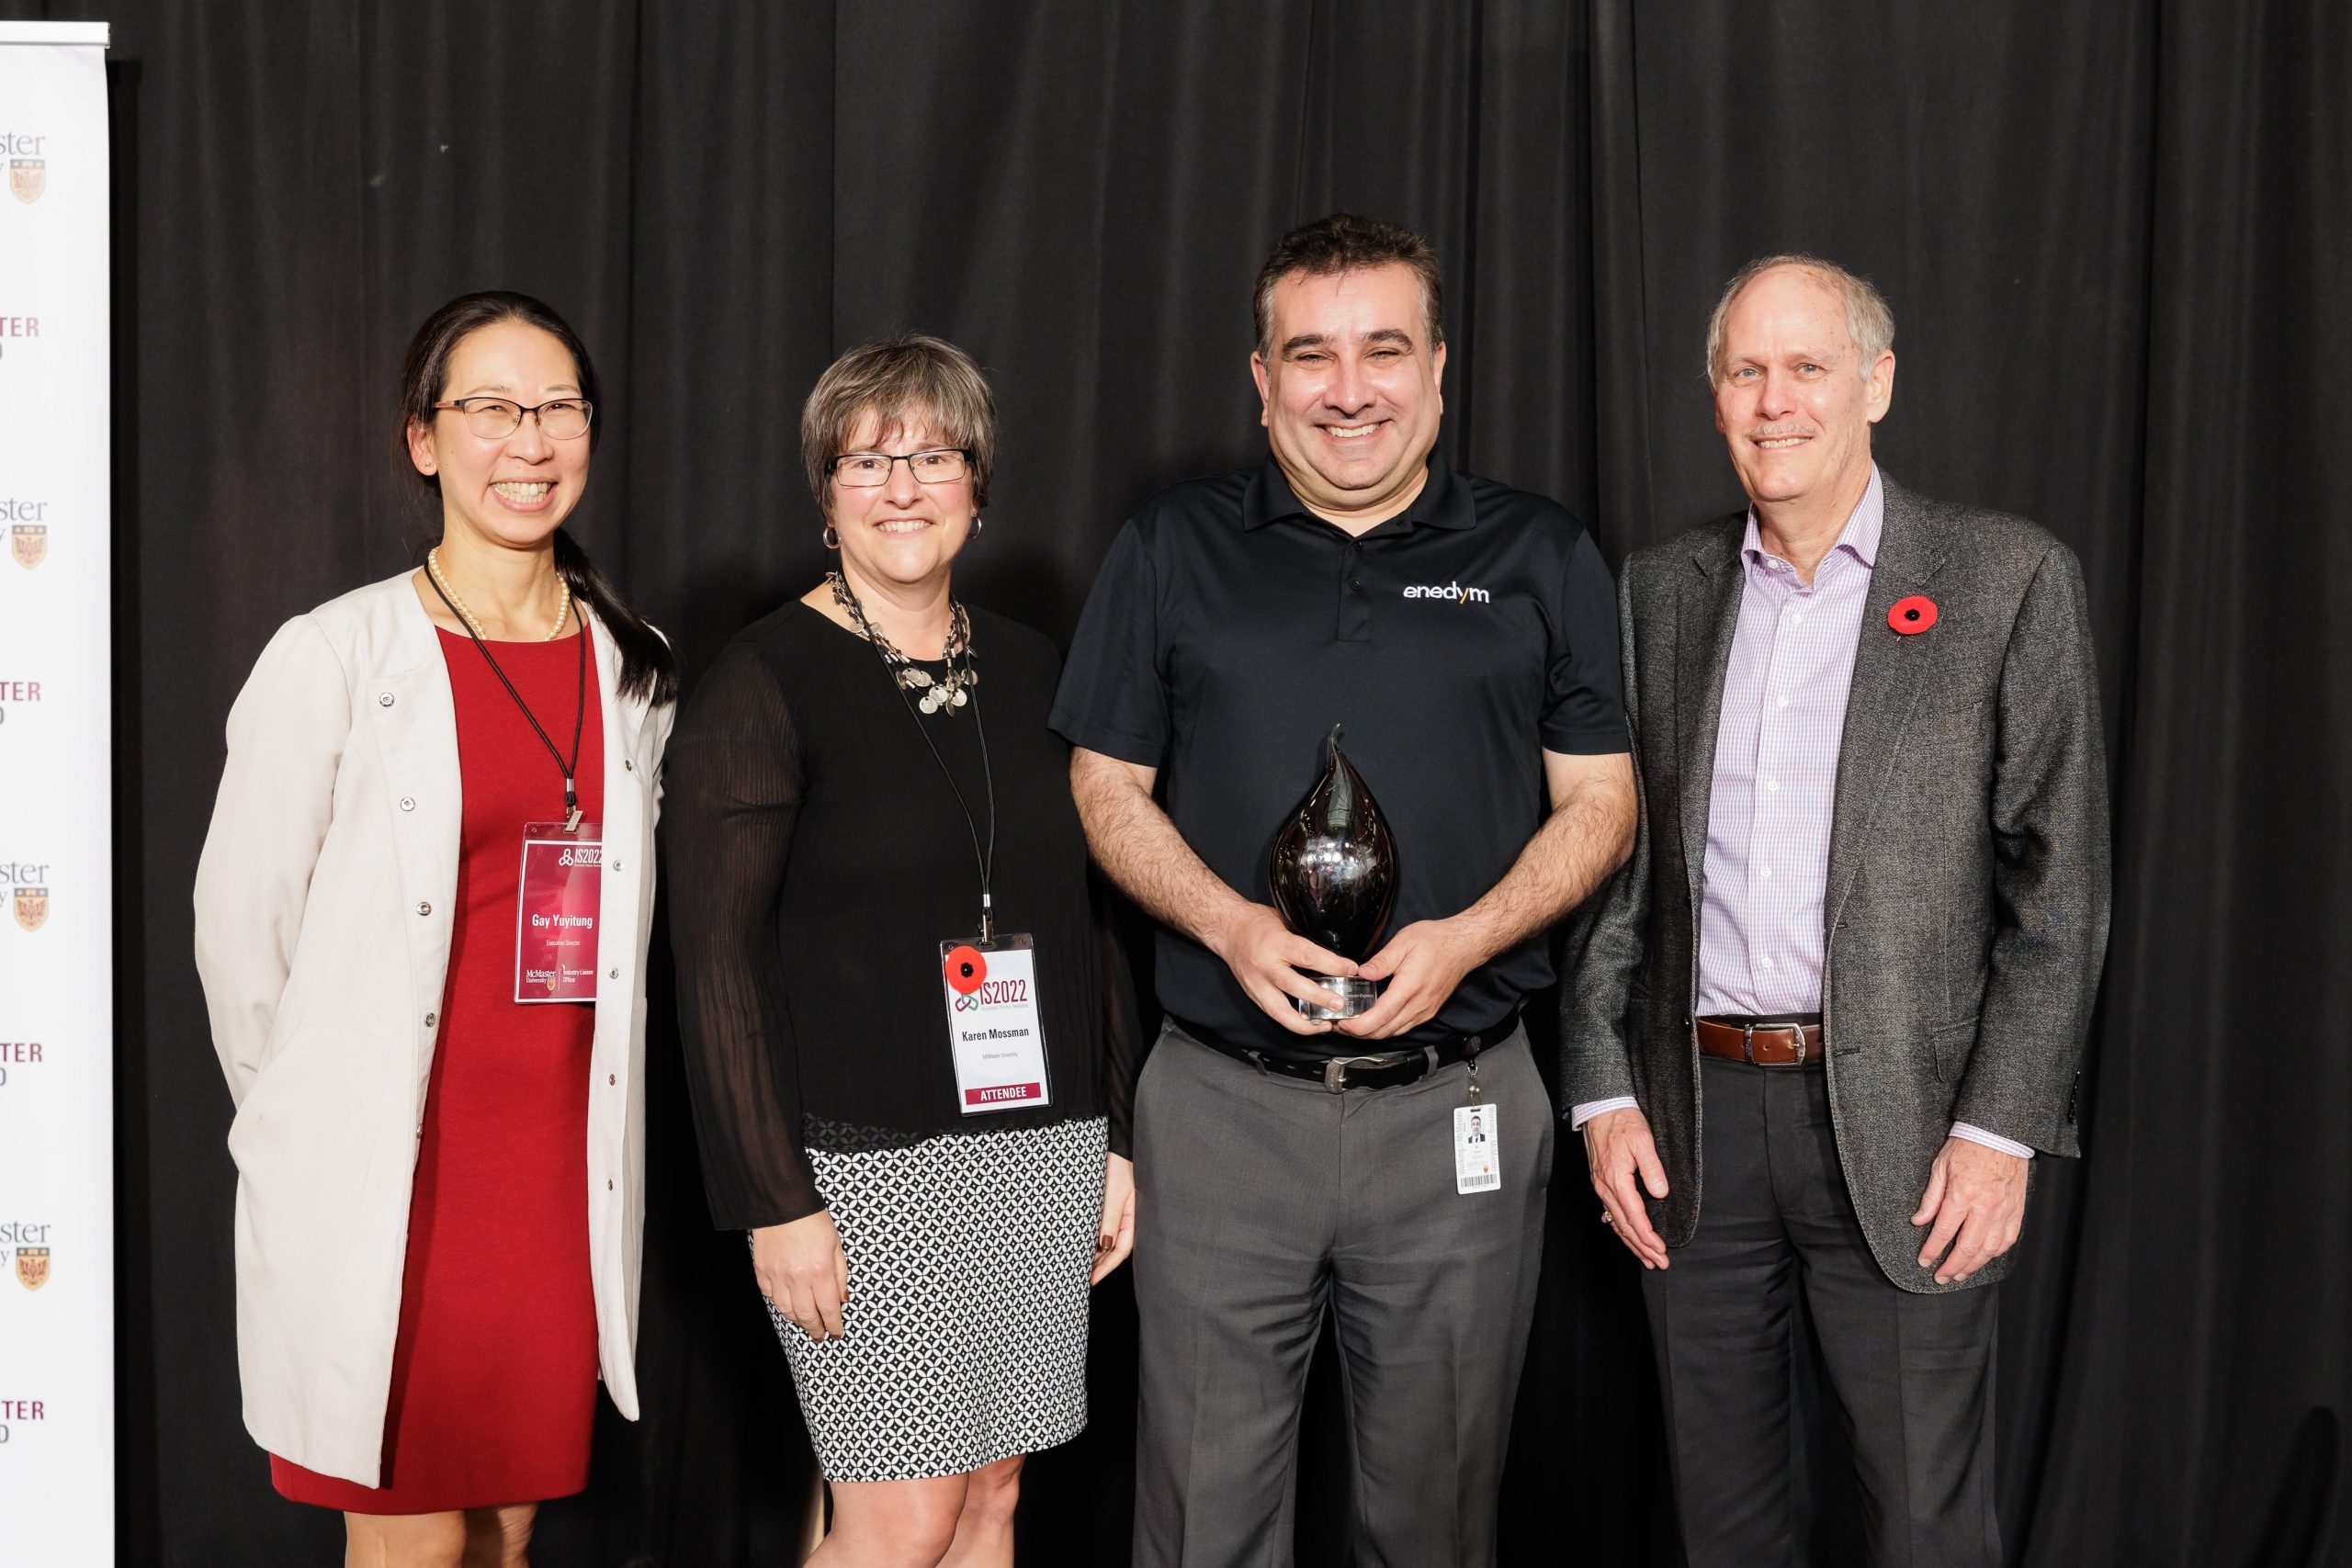 Ali Emadi is presented the Lifetime Innovator award by Gay Yuyitung, executive director of MILO, Karen Mossman, vice-president, research, and David Farrar, president.